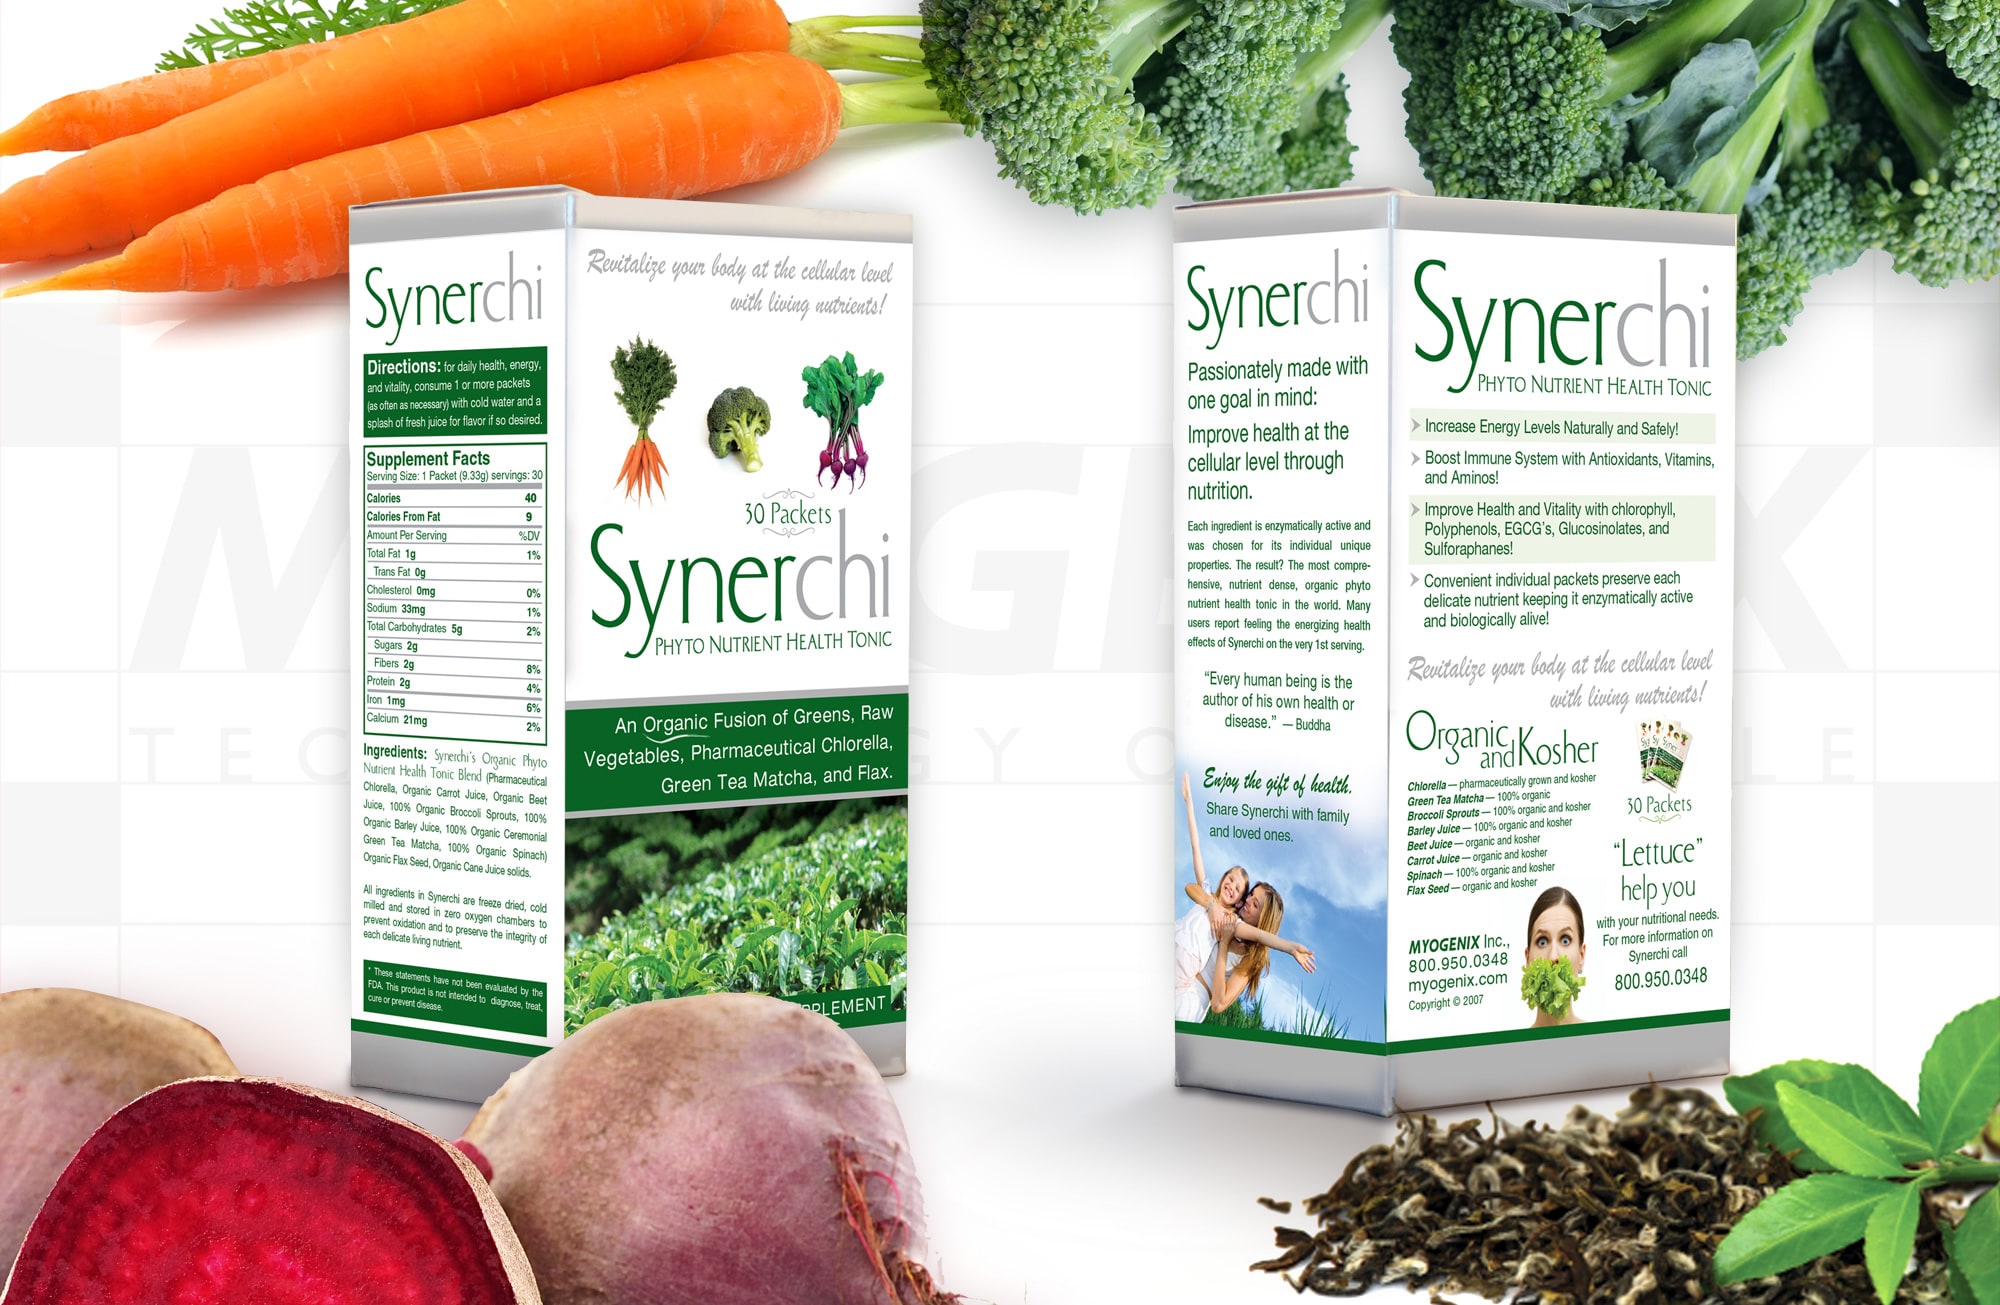  USA, Synerchi™ Product Packaging For a Bright White sheet, 4 Color Process, Green and Silver Metallic PMS inks & Cover Coating 